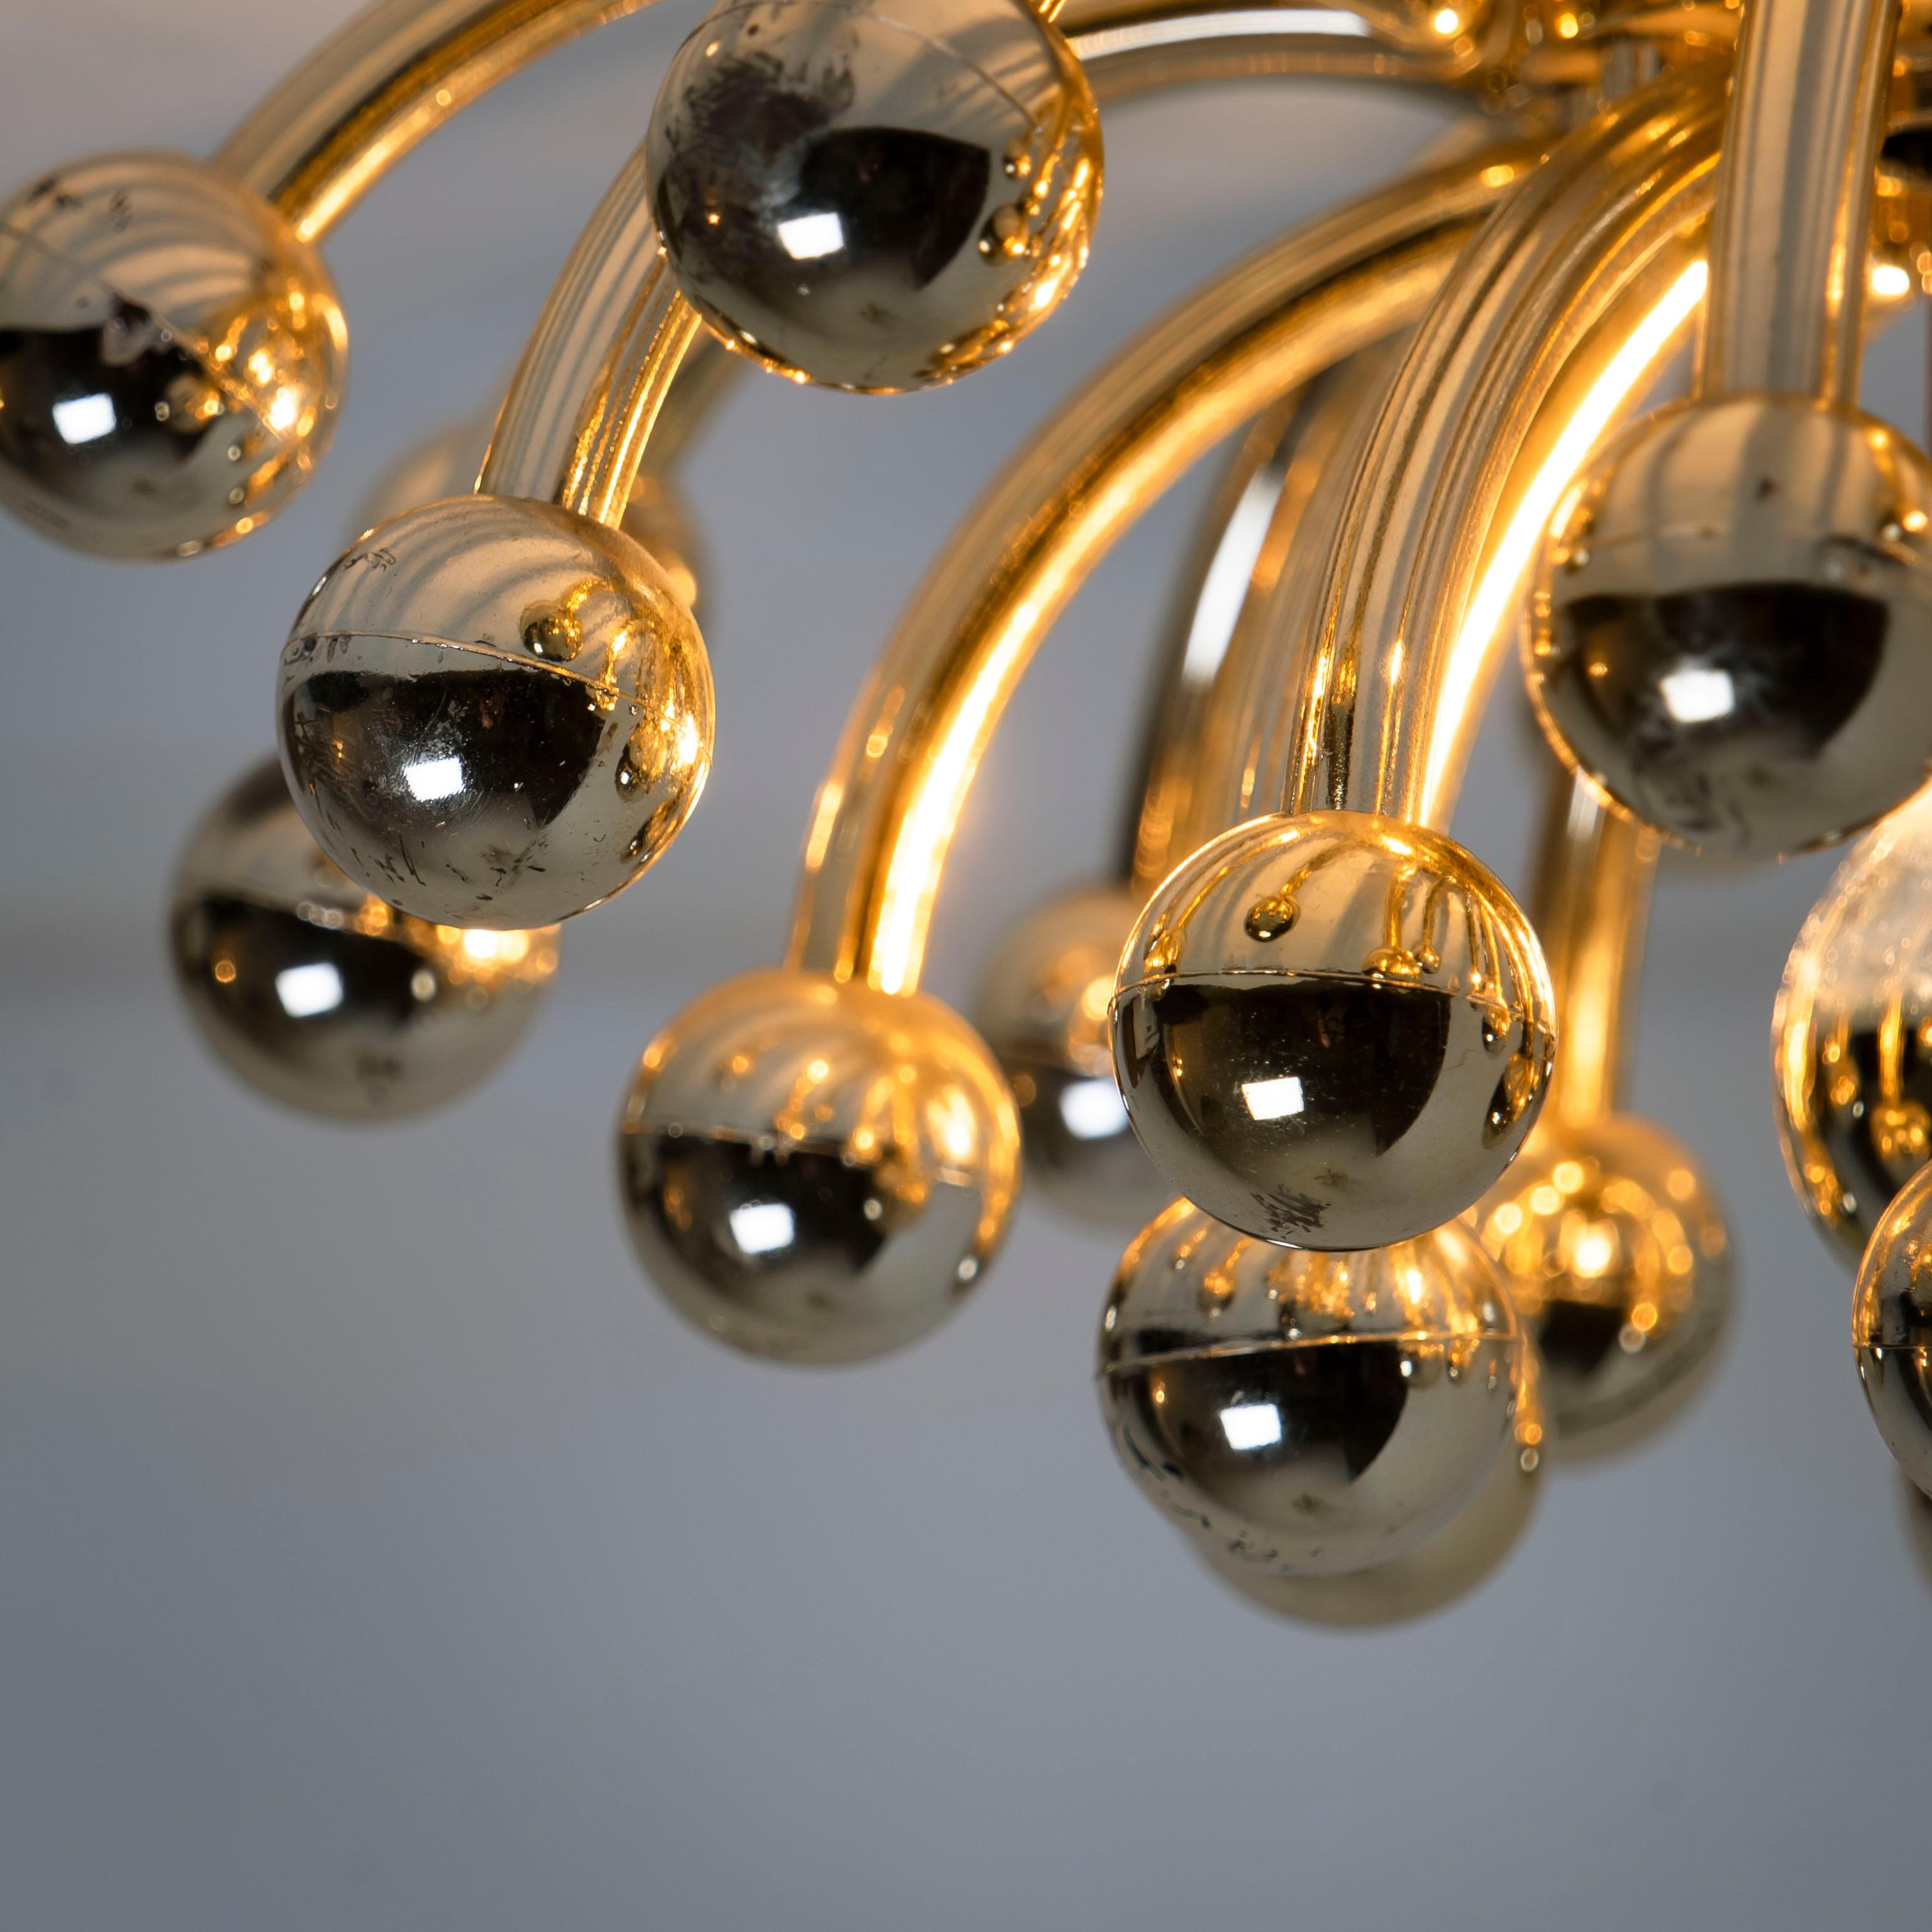 Pair of Valenti Luce Pistillino Wall Lights, Italy, 1970 For Sale 4